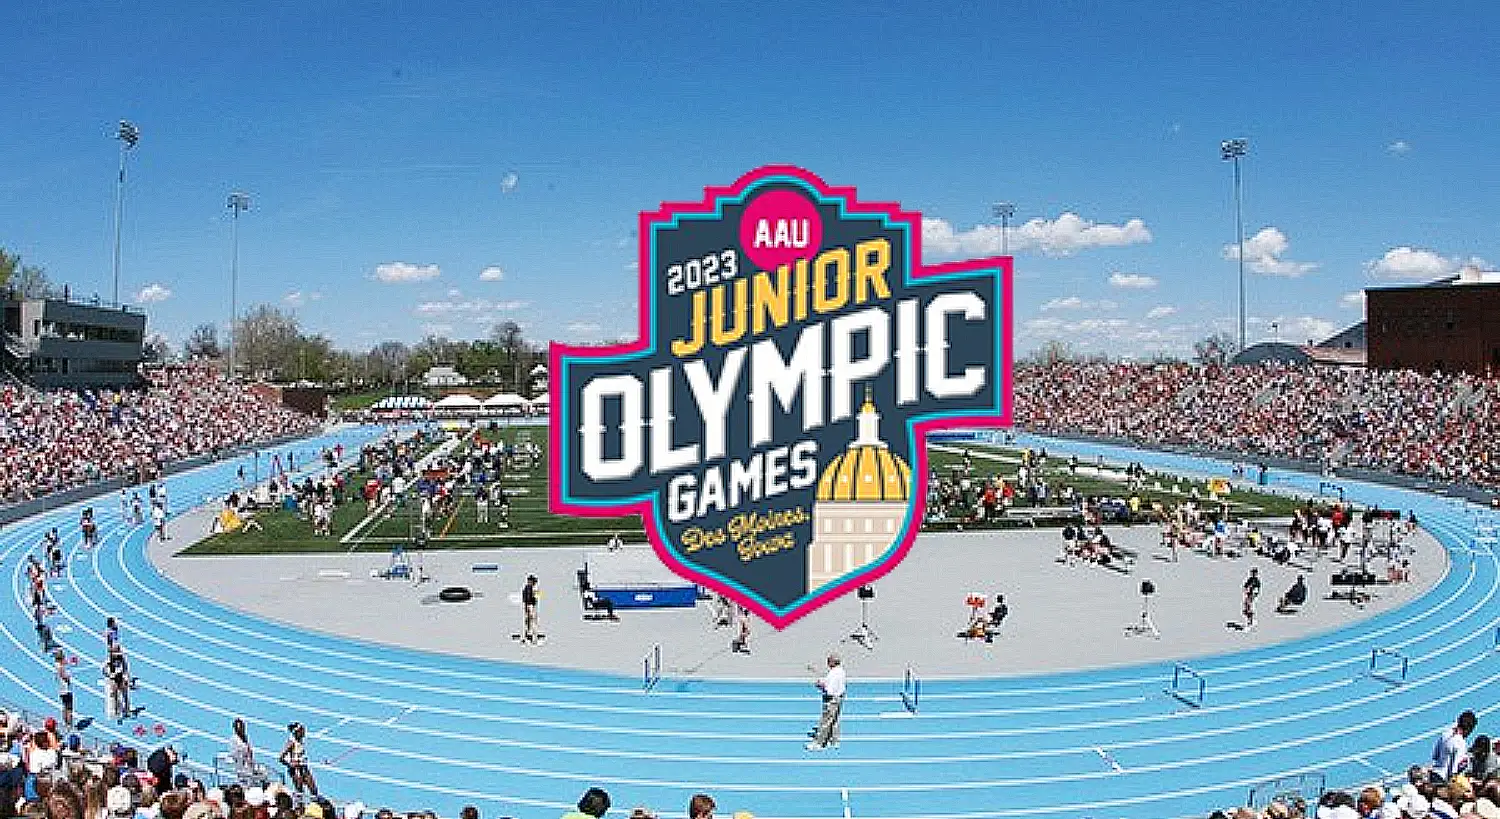 Watch the AAU Junior Olympics Track and Field Games live stream